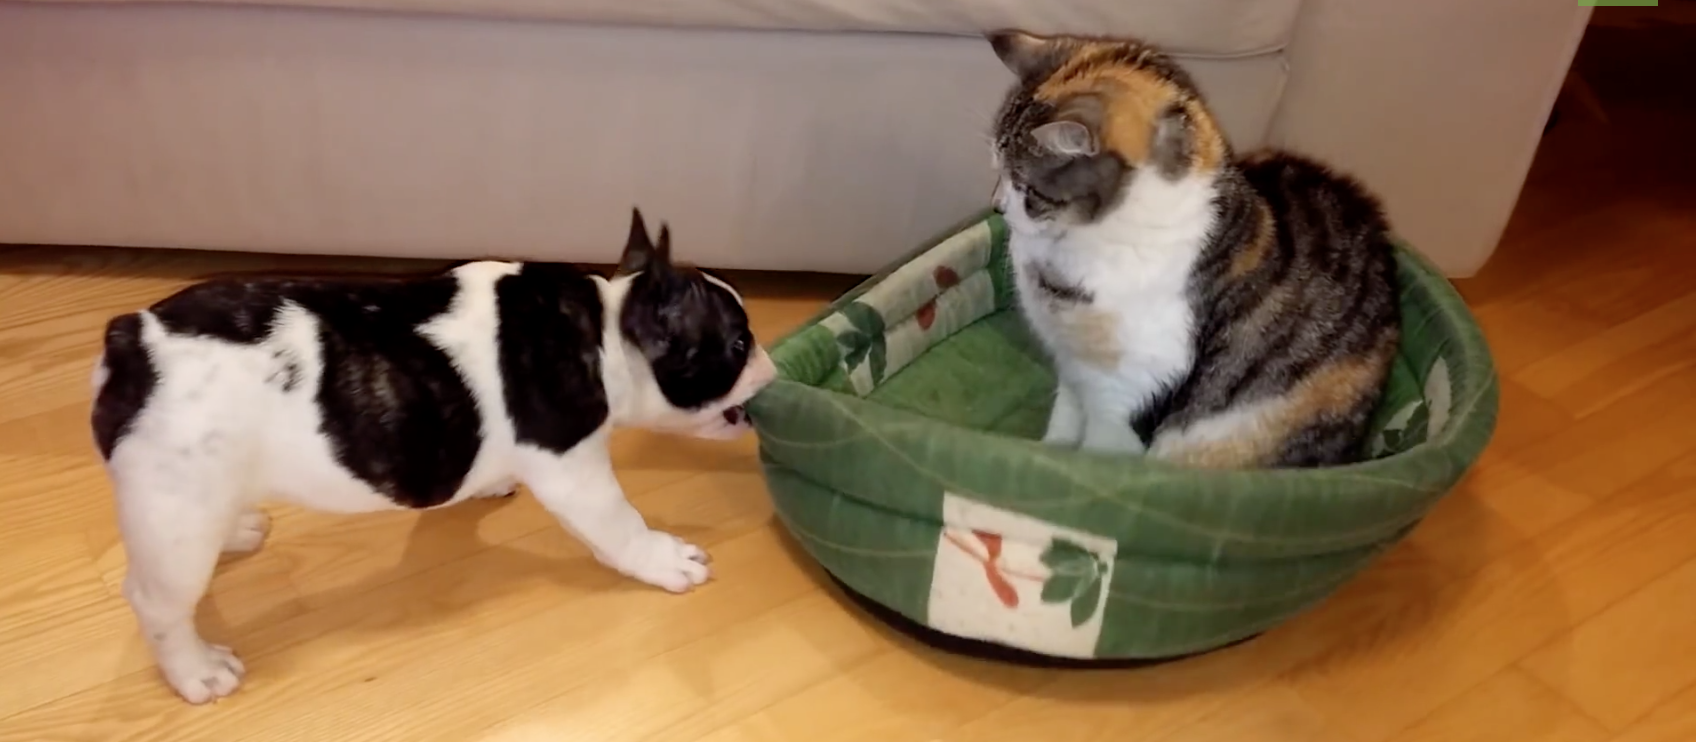 40 Top Photos French Bulldog Temperament With Cats - How to train a French bulldog? - Dog&Cat